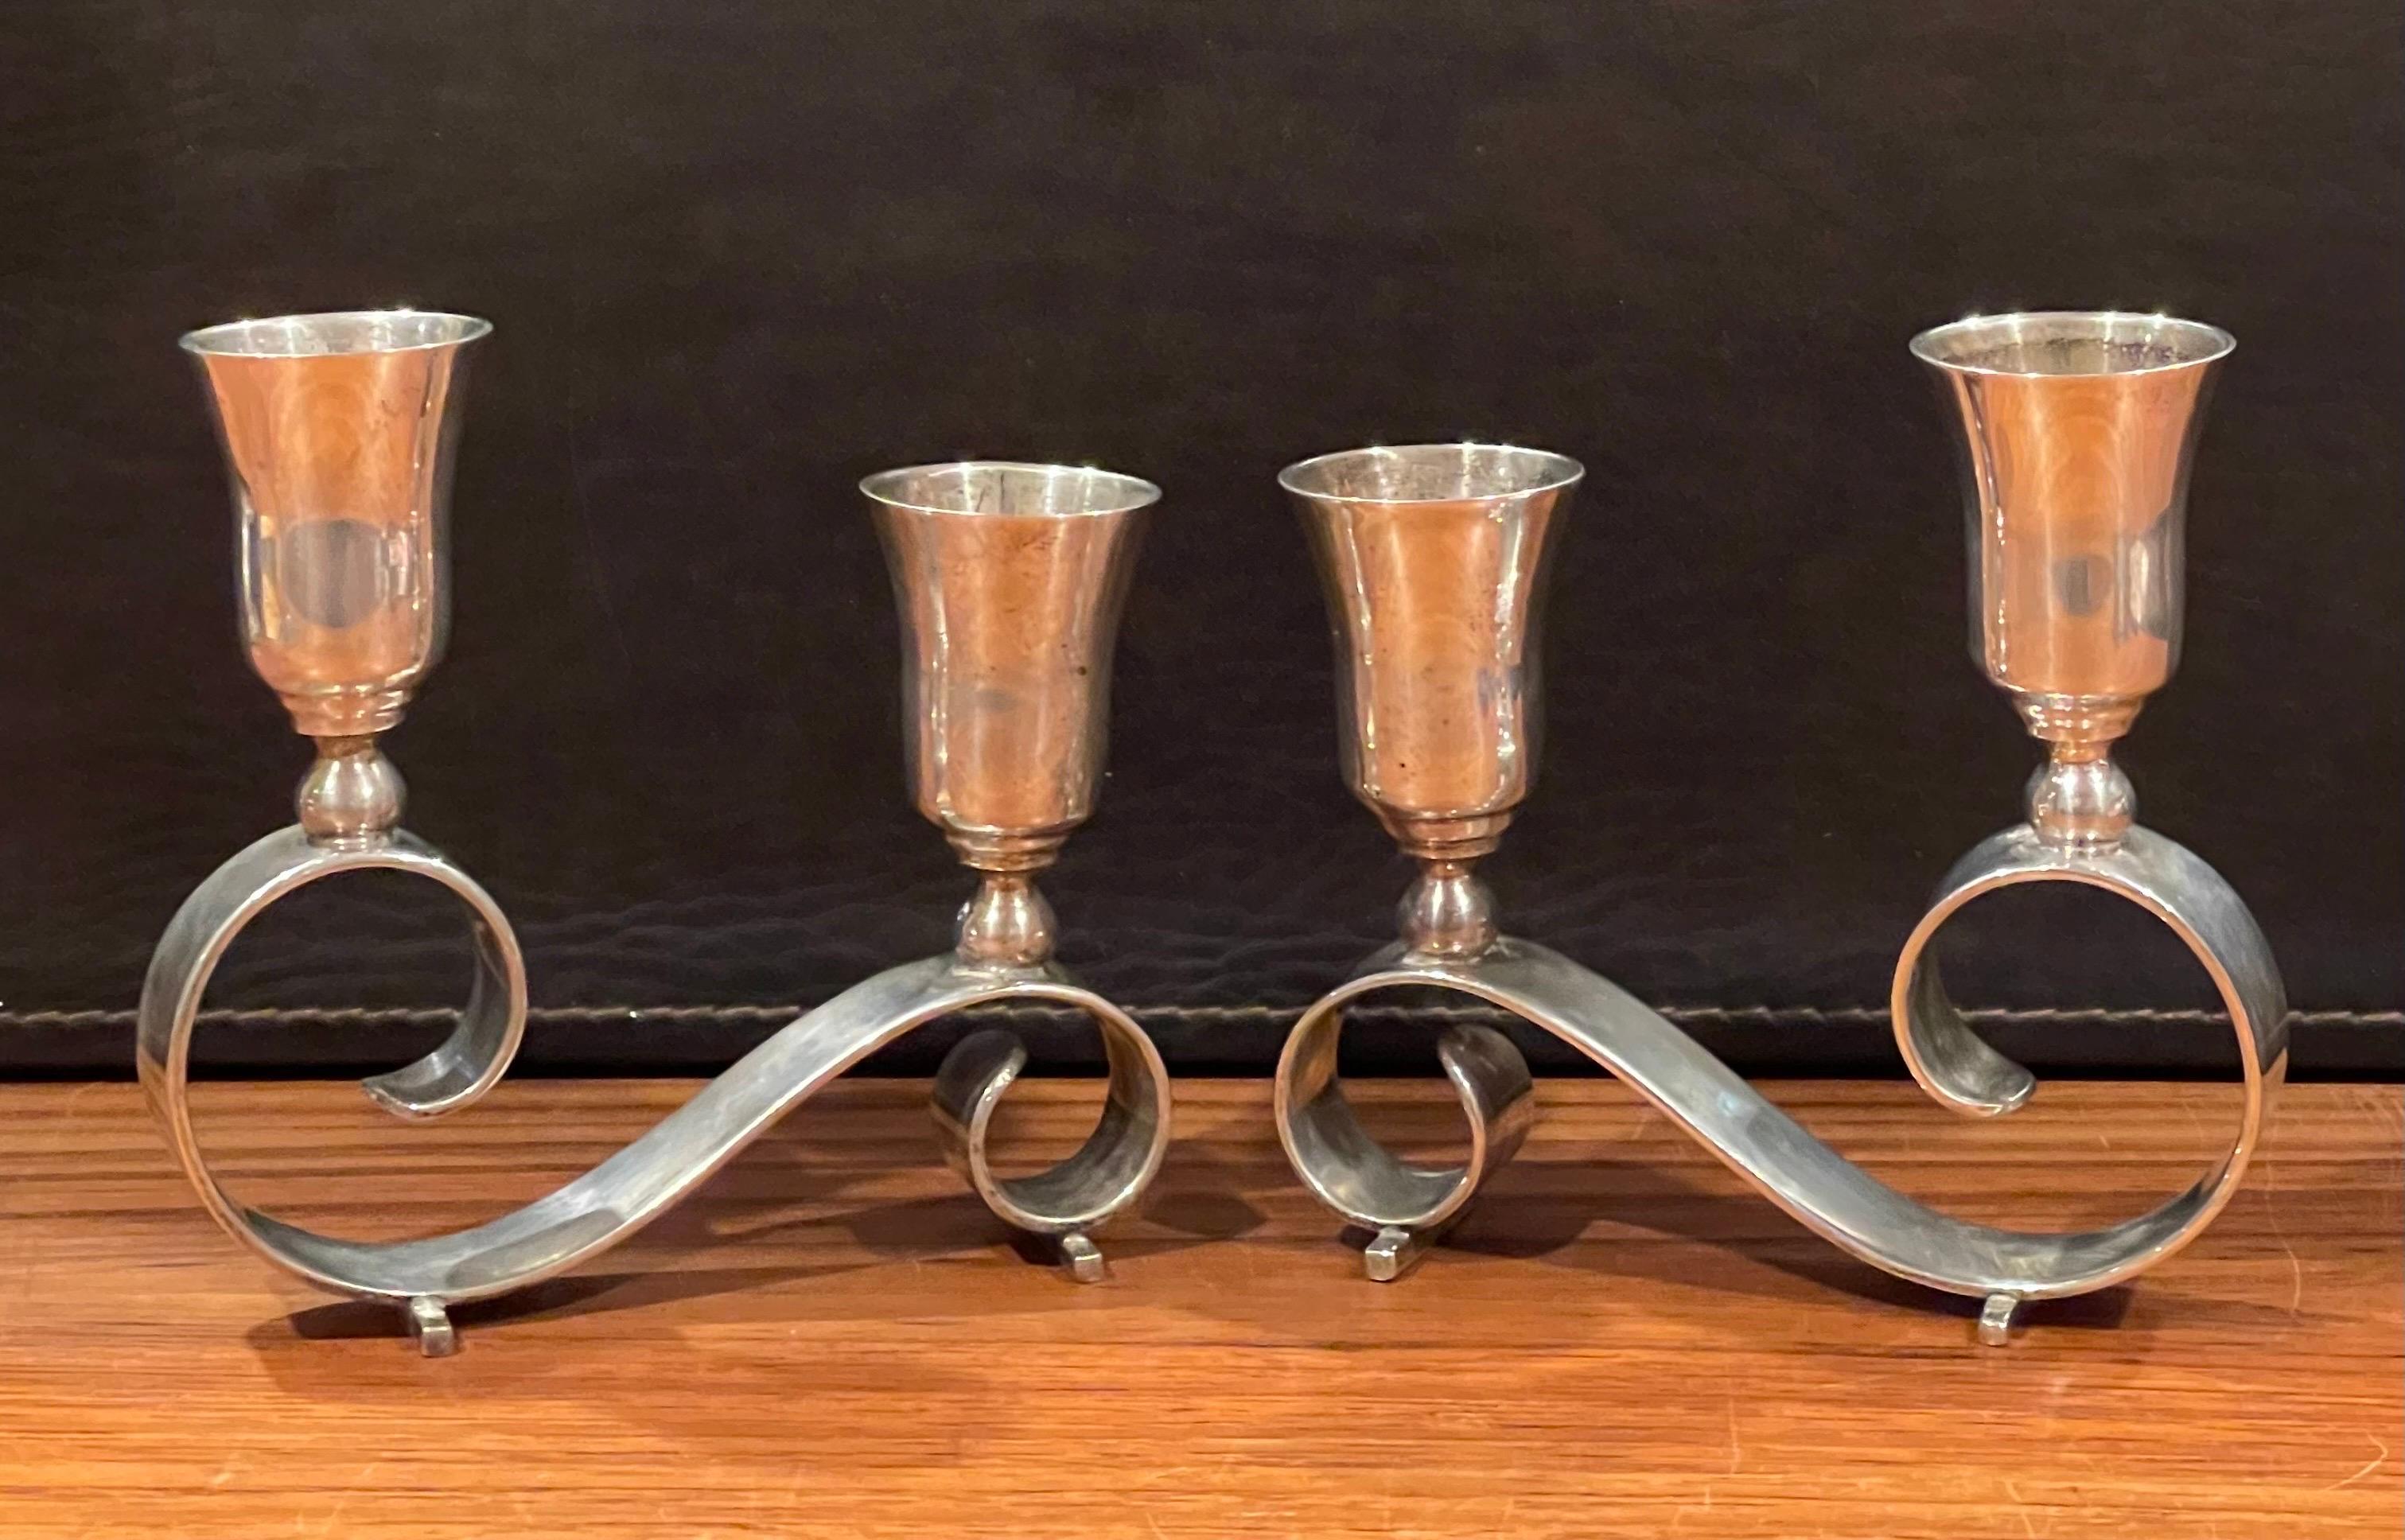 Pair of MCM Modernist Sterling Silver Candleholders by Juvento Lopez Reyes For Sale 6